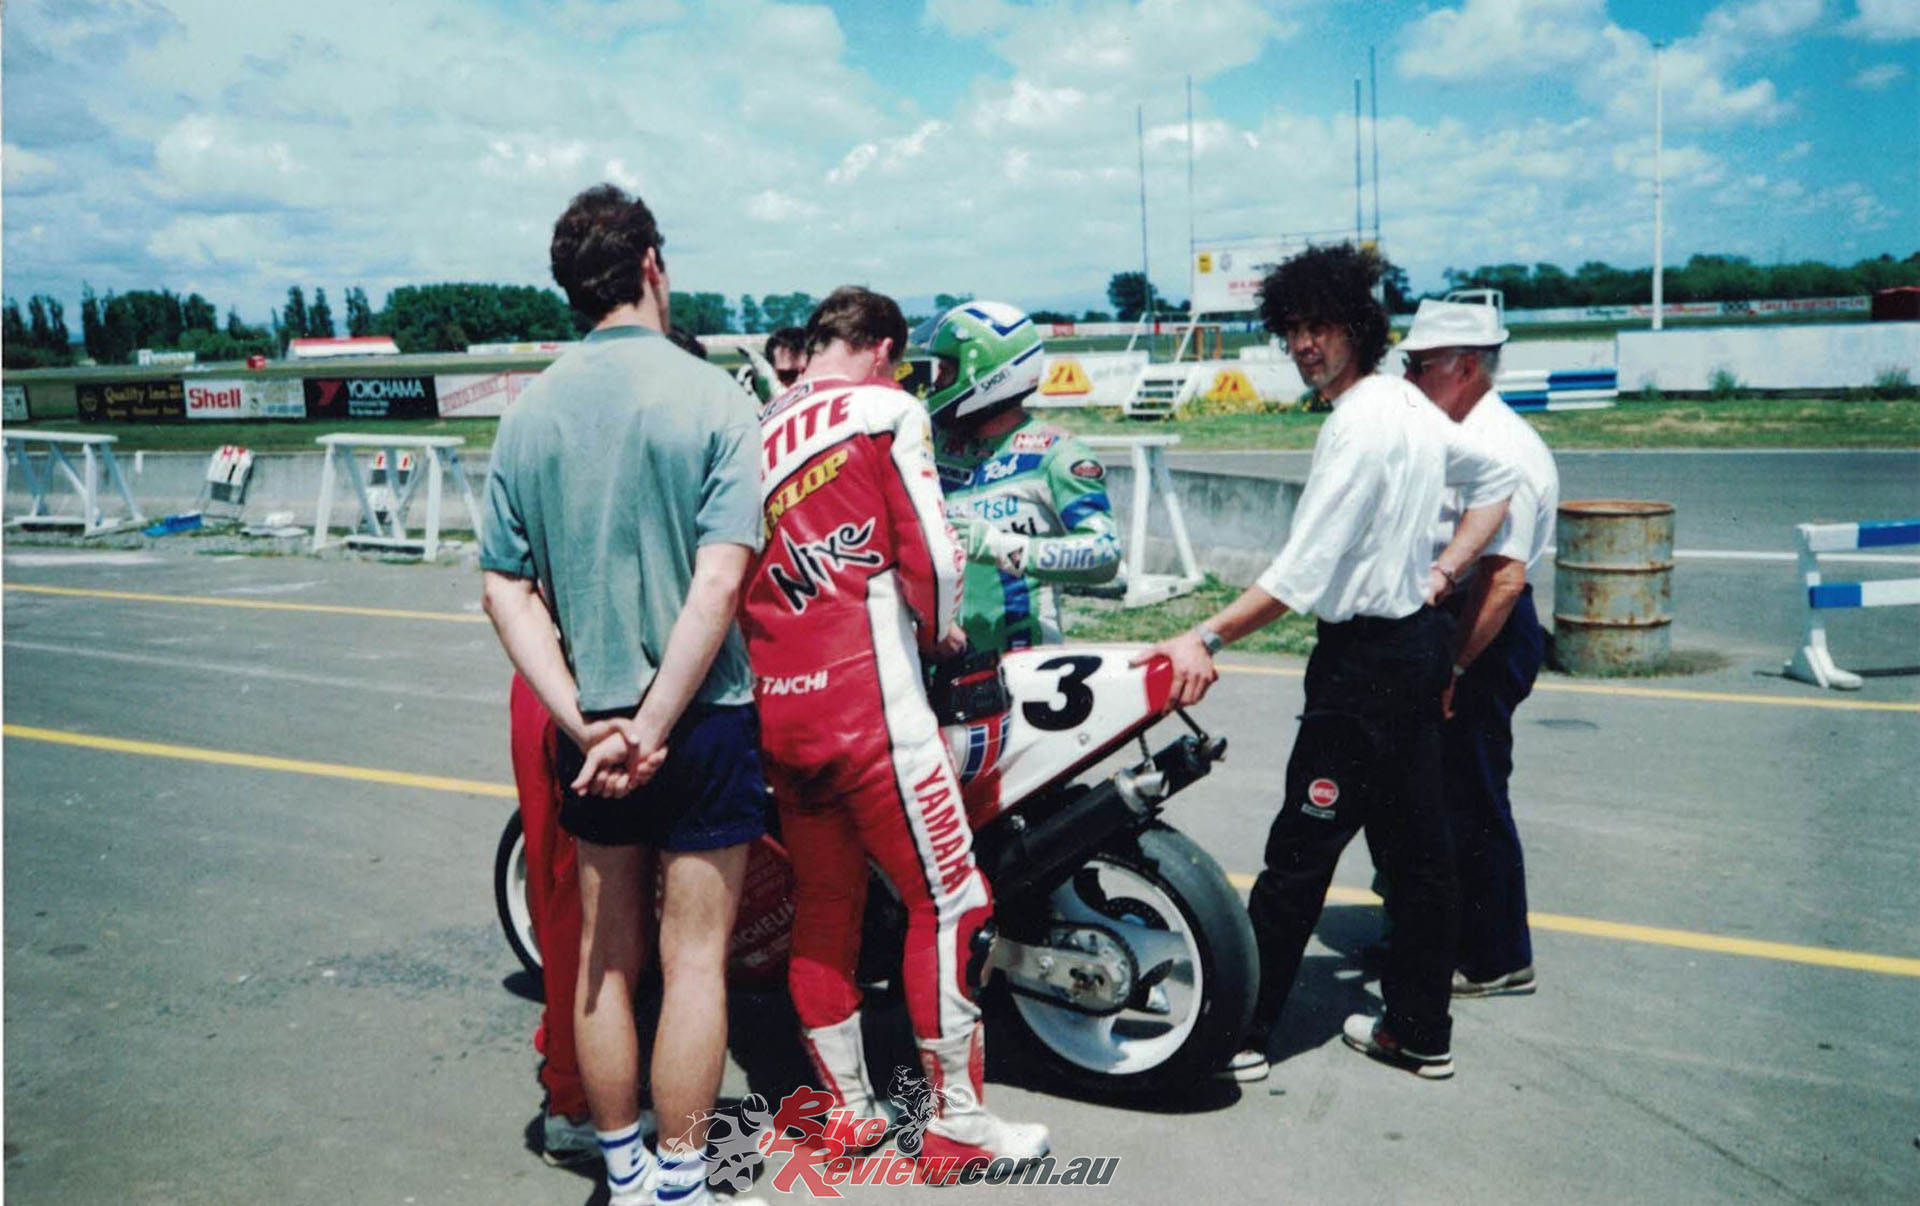 Phillis testing the Roche Ducati at the end of the 1990 WorldSBK season after an awesome round...